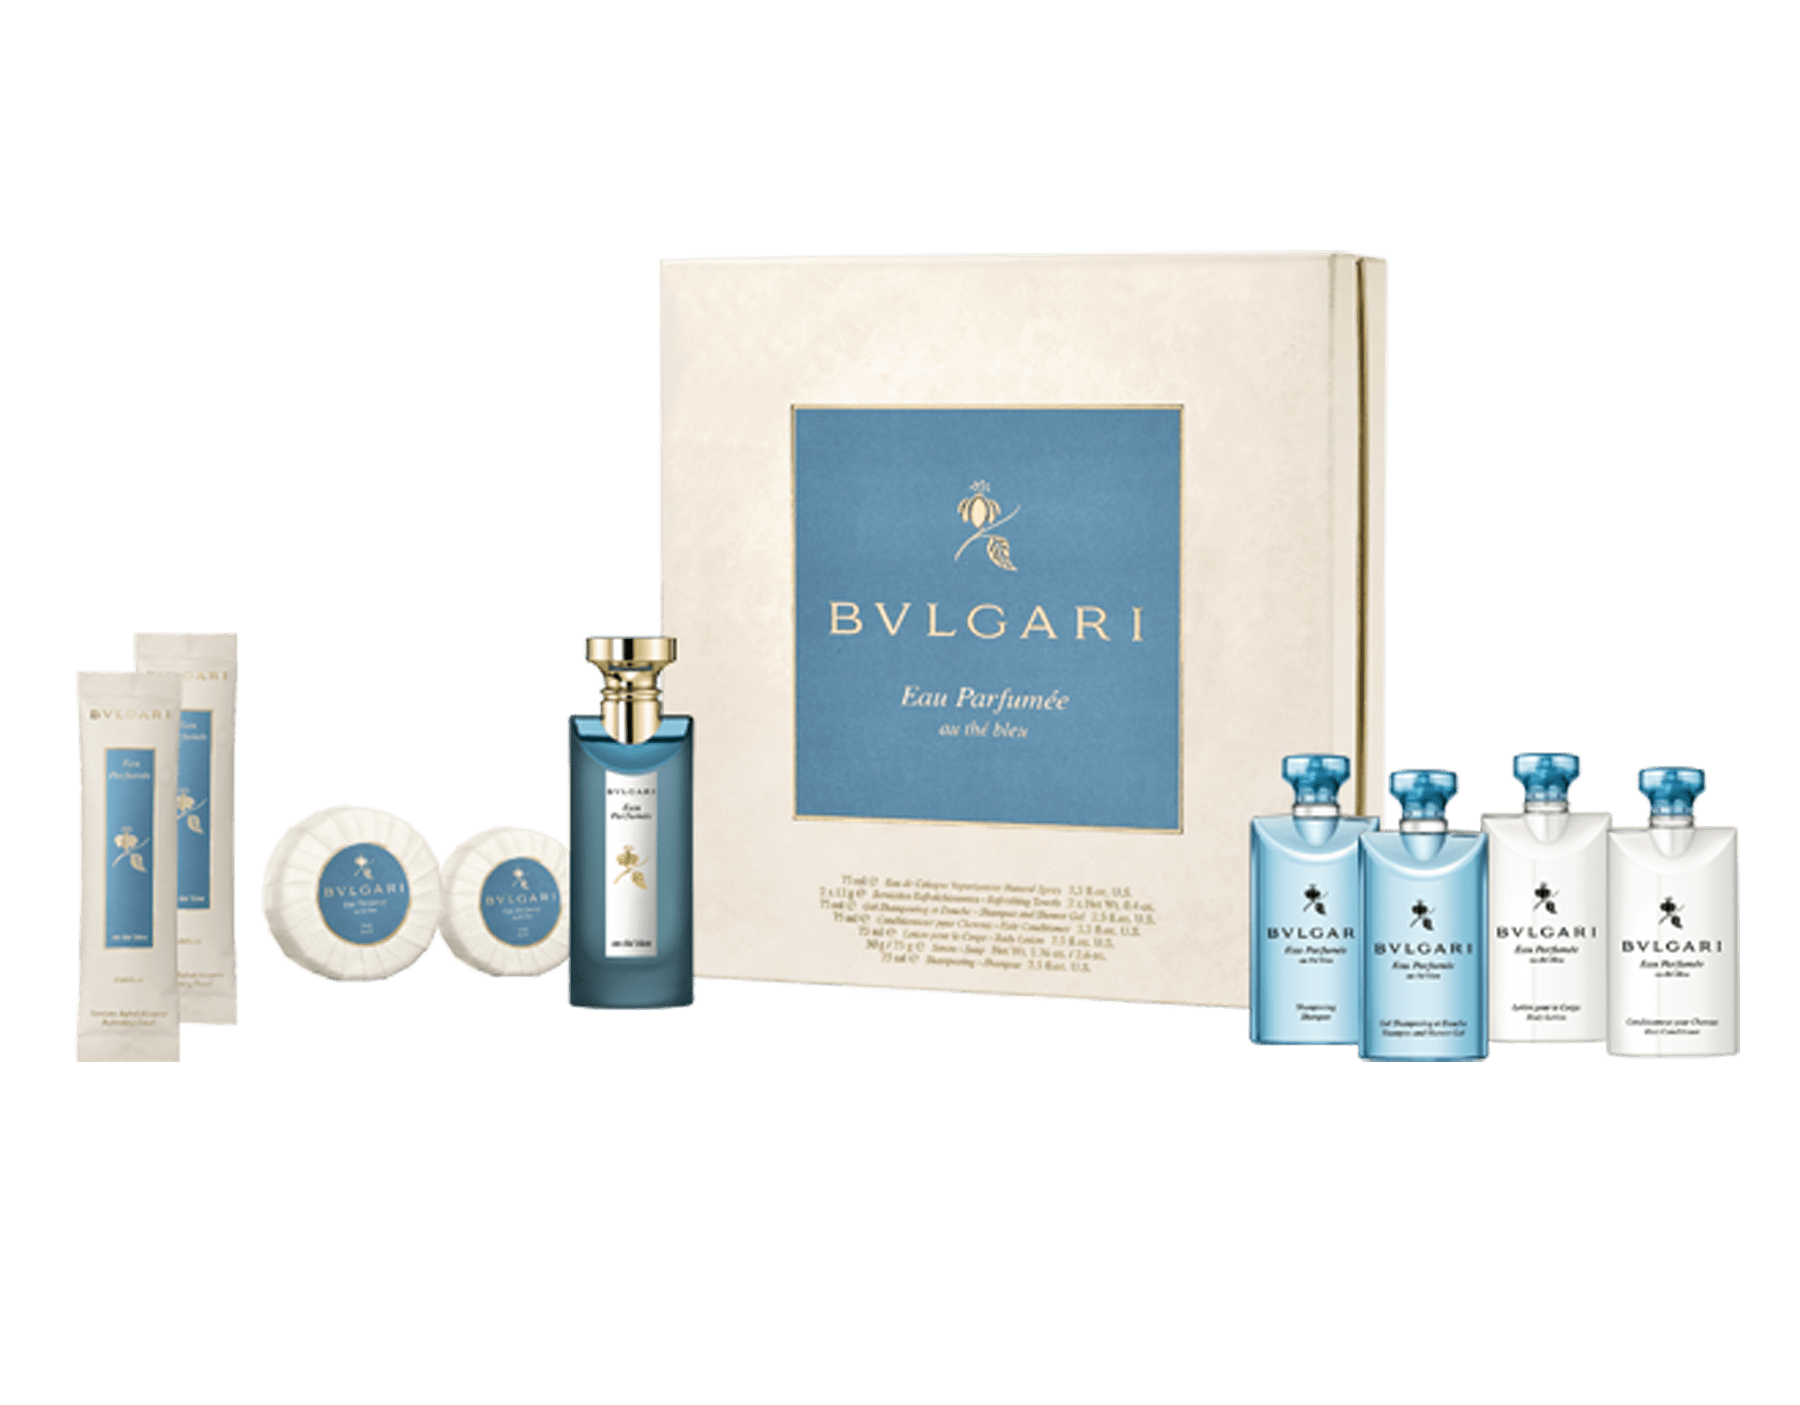 bvlgari exclusive guest collection